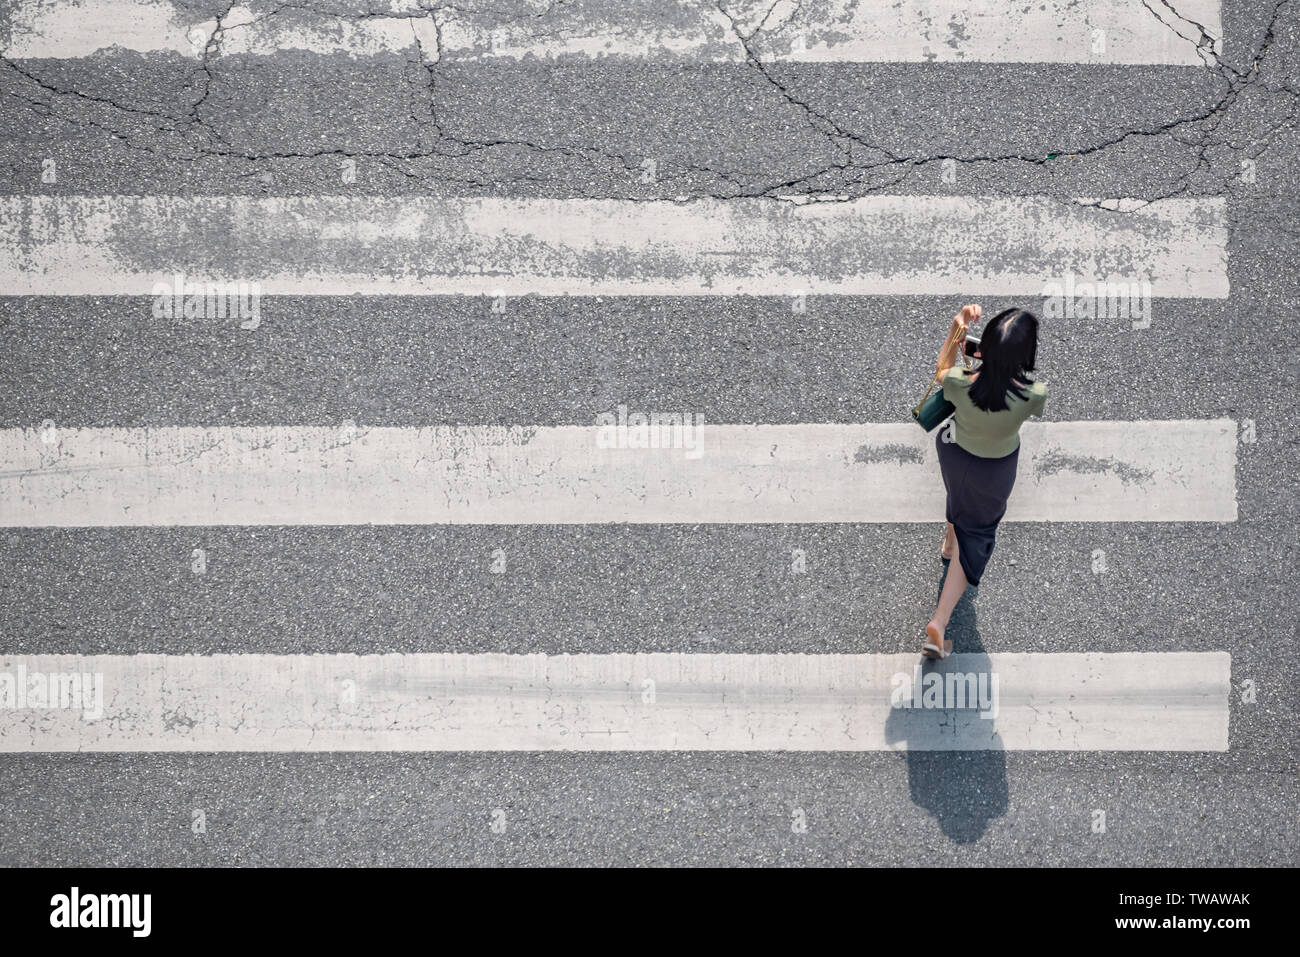 Chengdu, Sichuan province, China - June 12, 2019 : Young chinese woman walking on a zebra crossing aerial top view on a sunny day Stock Photo